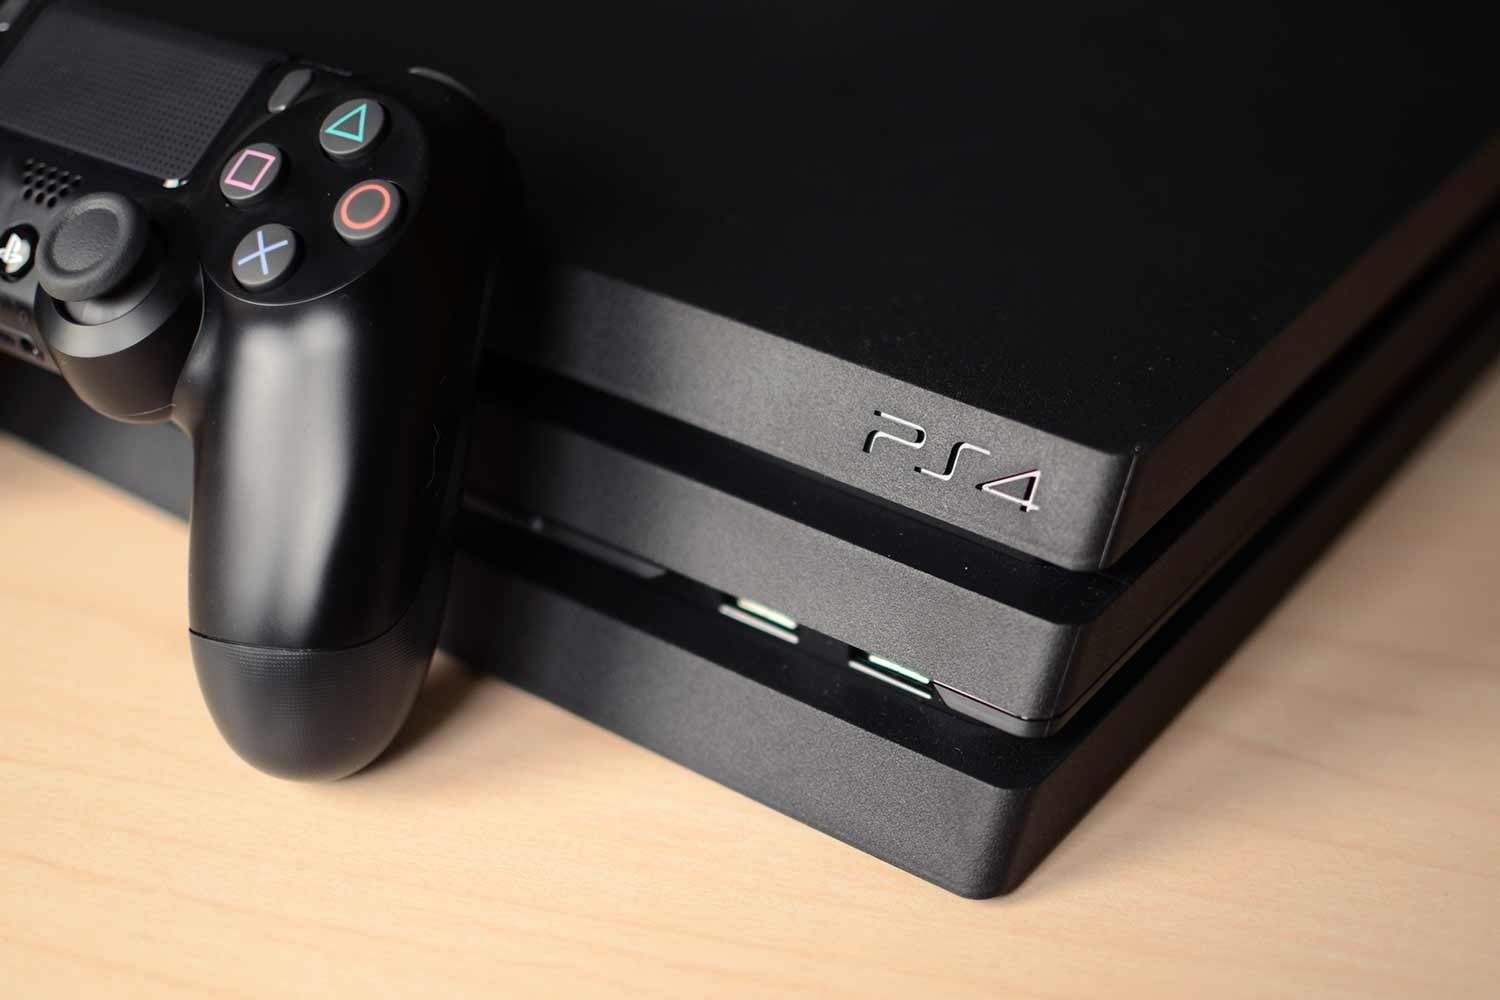 The PS4 update to FW 5.50 is available to all, kernel exploit patched - NotebookCheck.net News